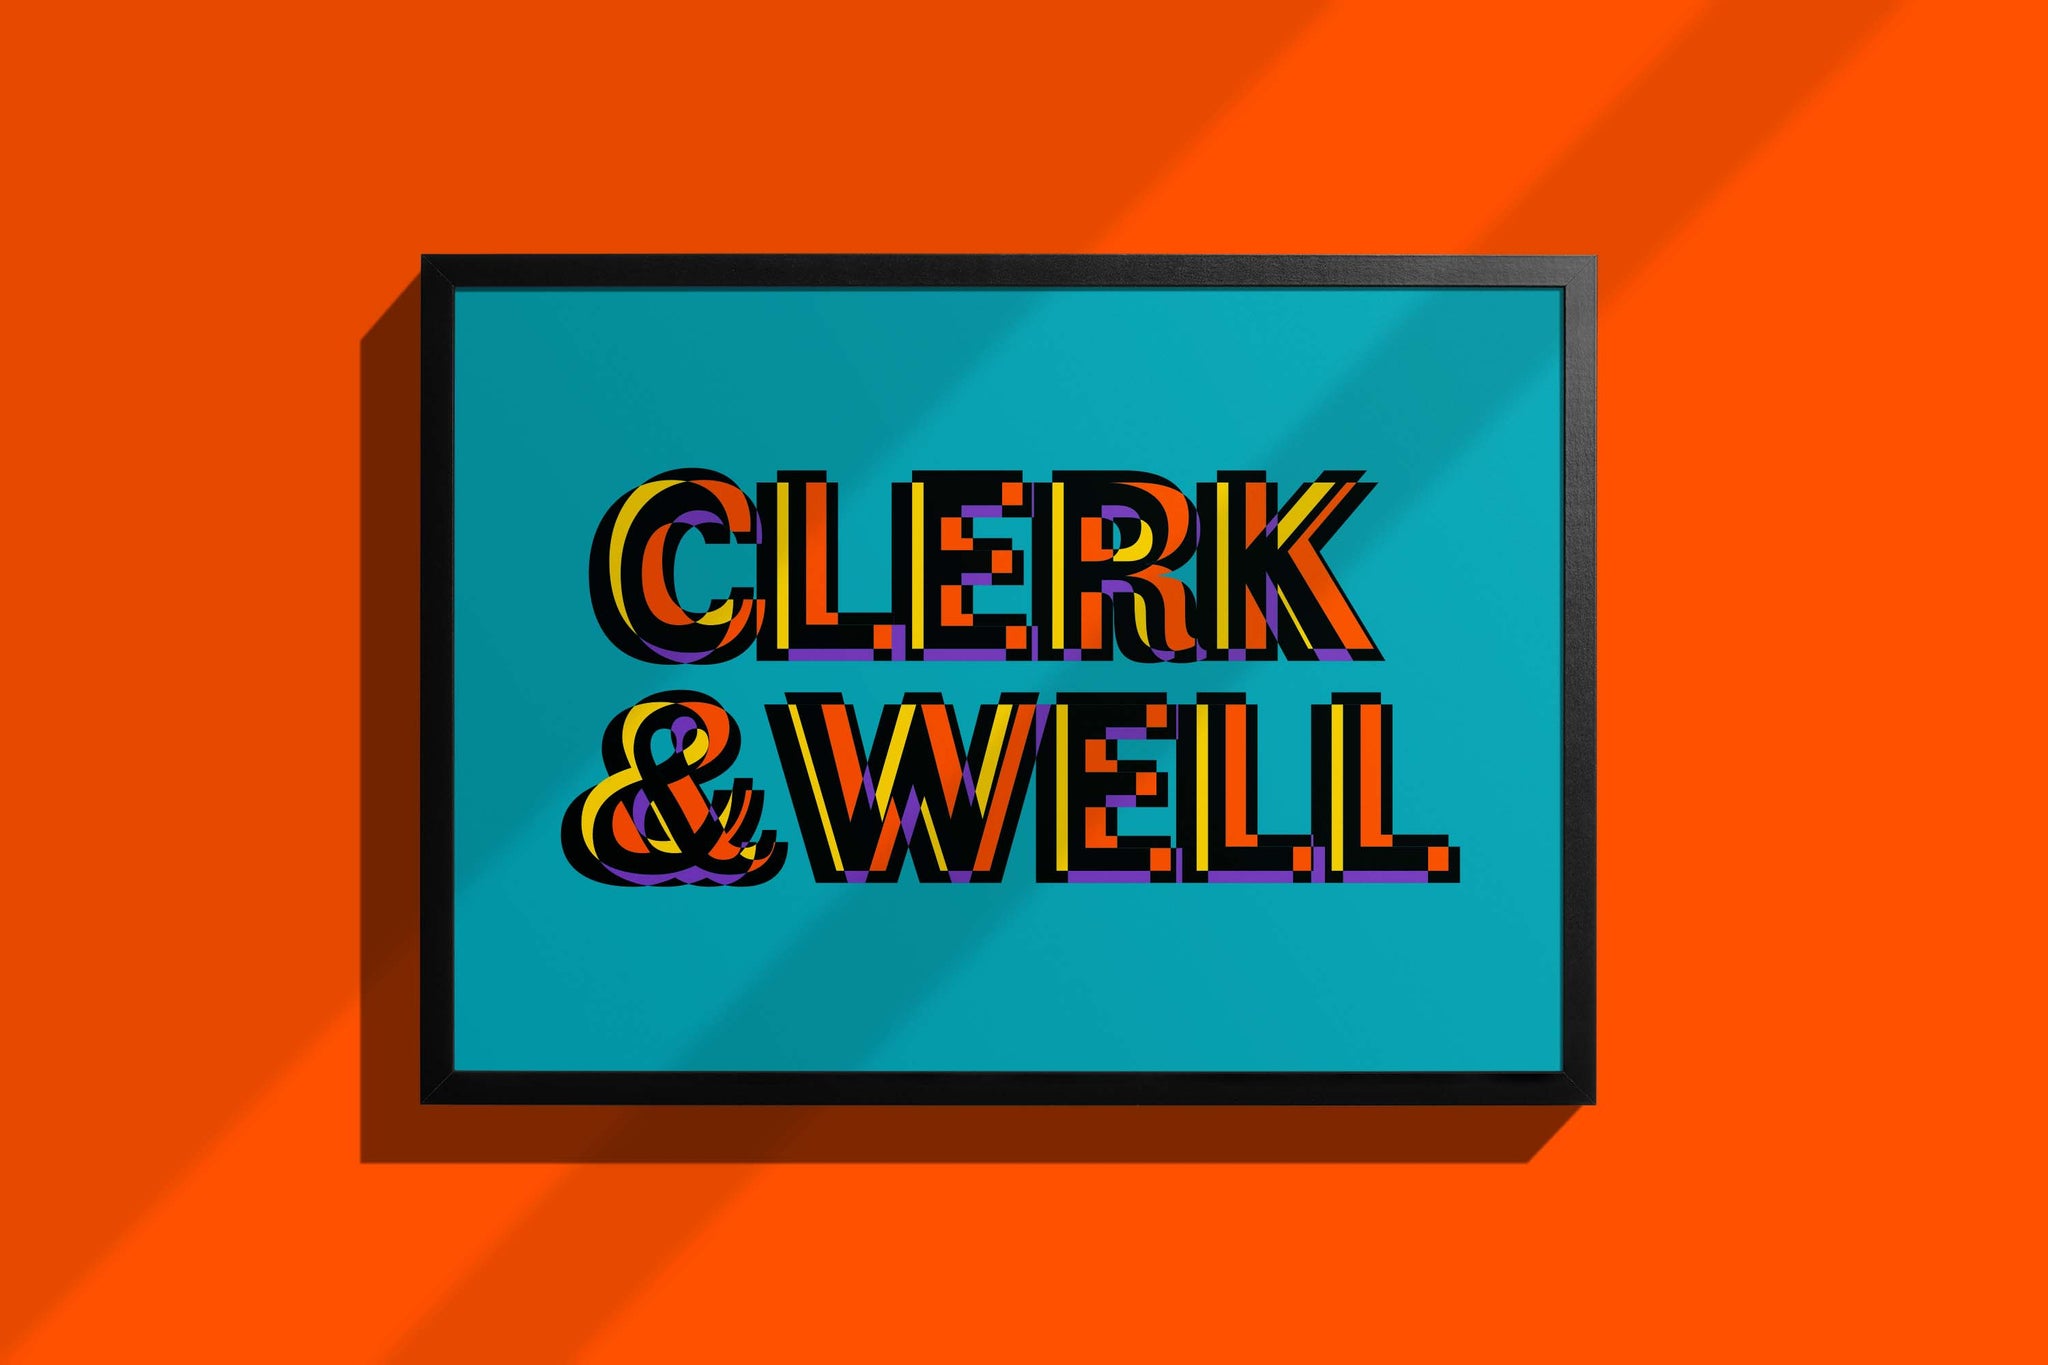 Clerk & Well | From the 'Barbie Can' Collection